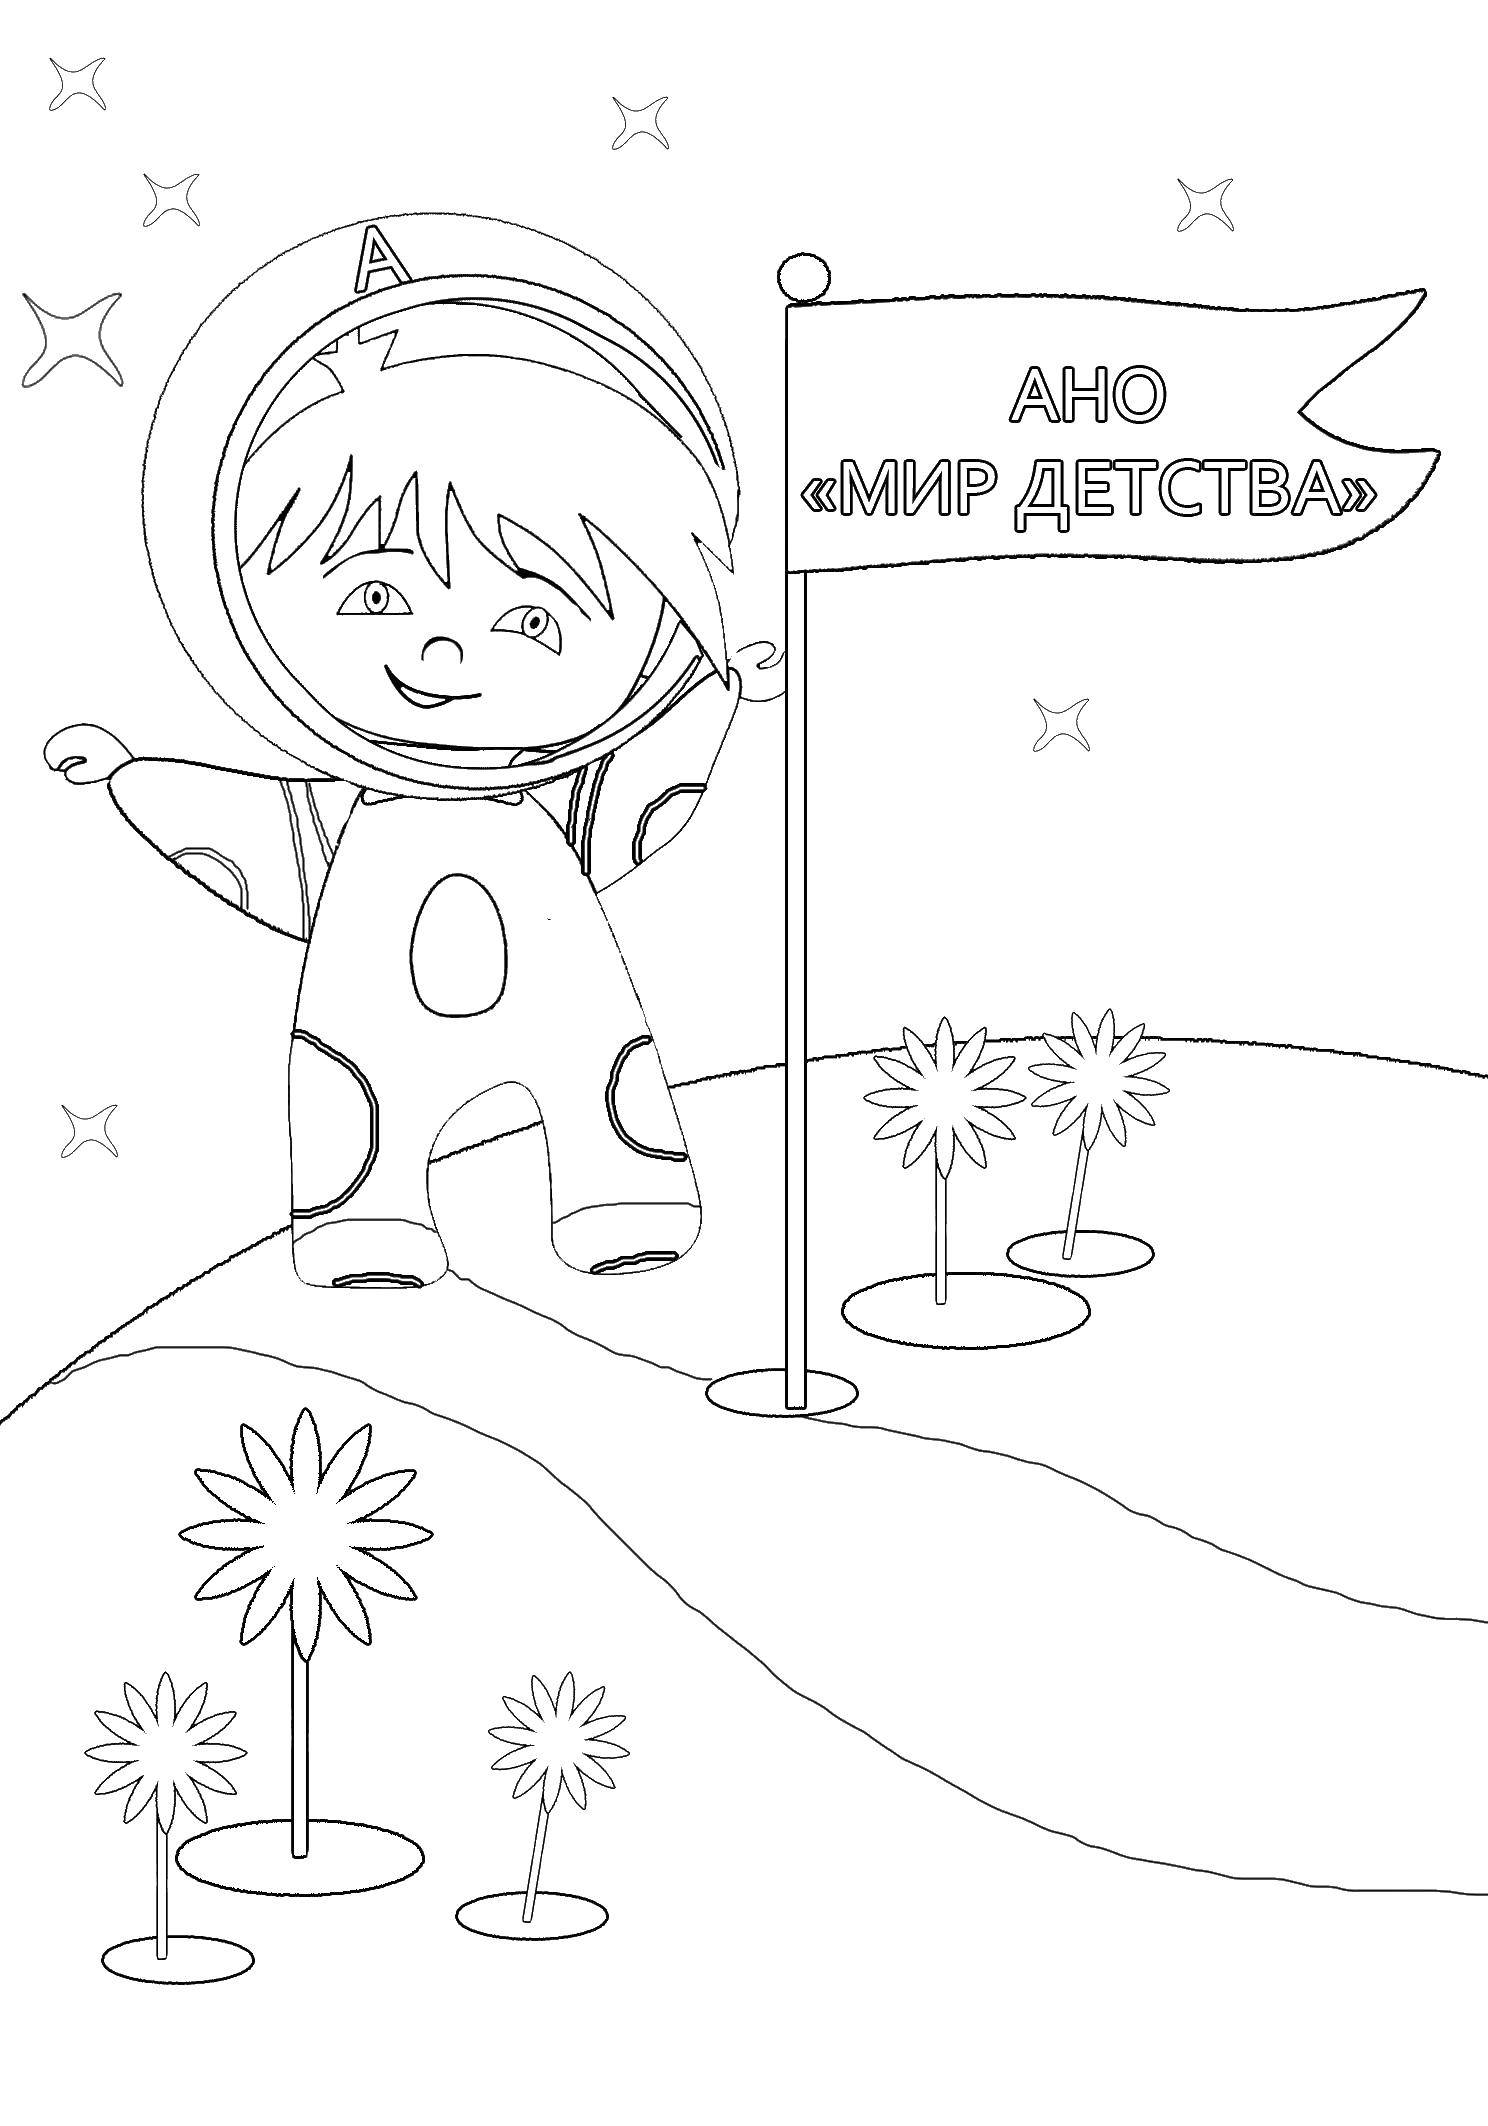 Coloring The world of childhood, a boy astronaut. Category children. Tags:  children, world, planet, boy, space.